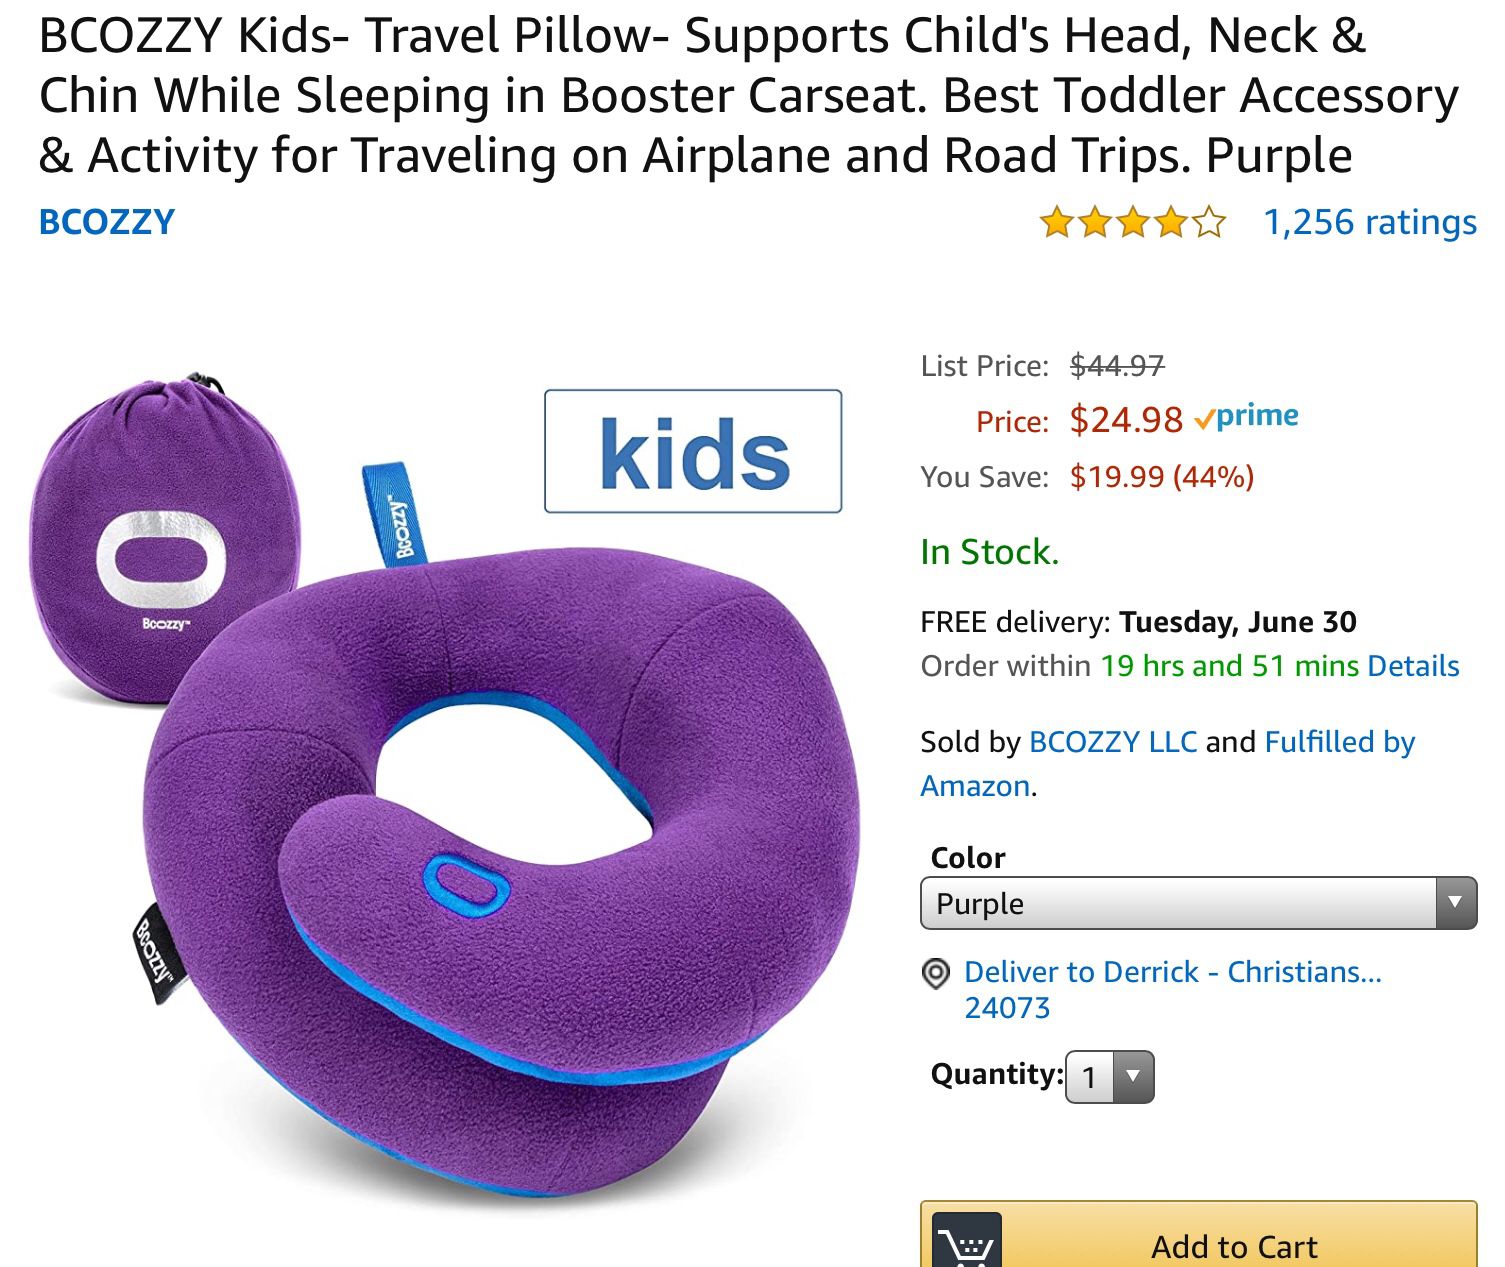 BCOZZY Kids- Travel Pillow- Supports Child's Head, Neck & Chin While Sleeping in Booster Carseat. Best Toddler Accessory & Activity for Traveling on